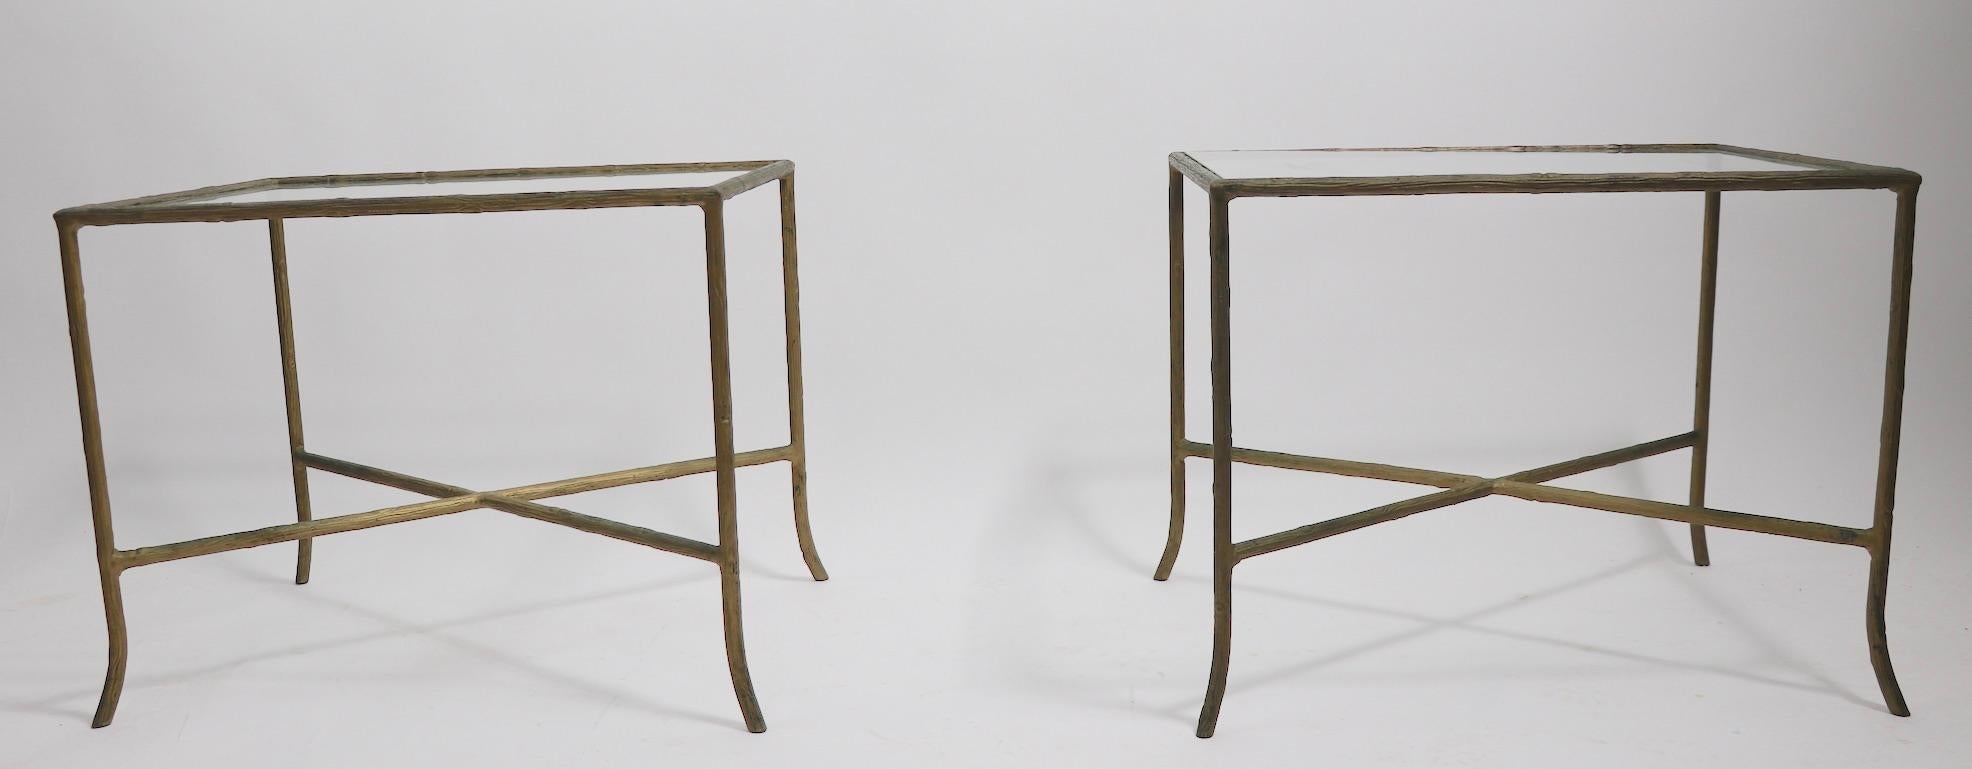 Pair of Faux Wood Cast Metal and Glass Tables For Sale 3